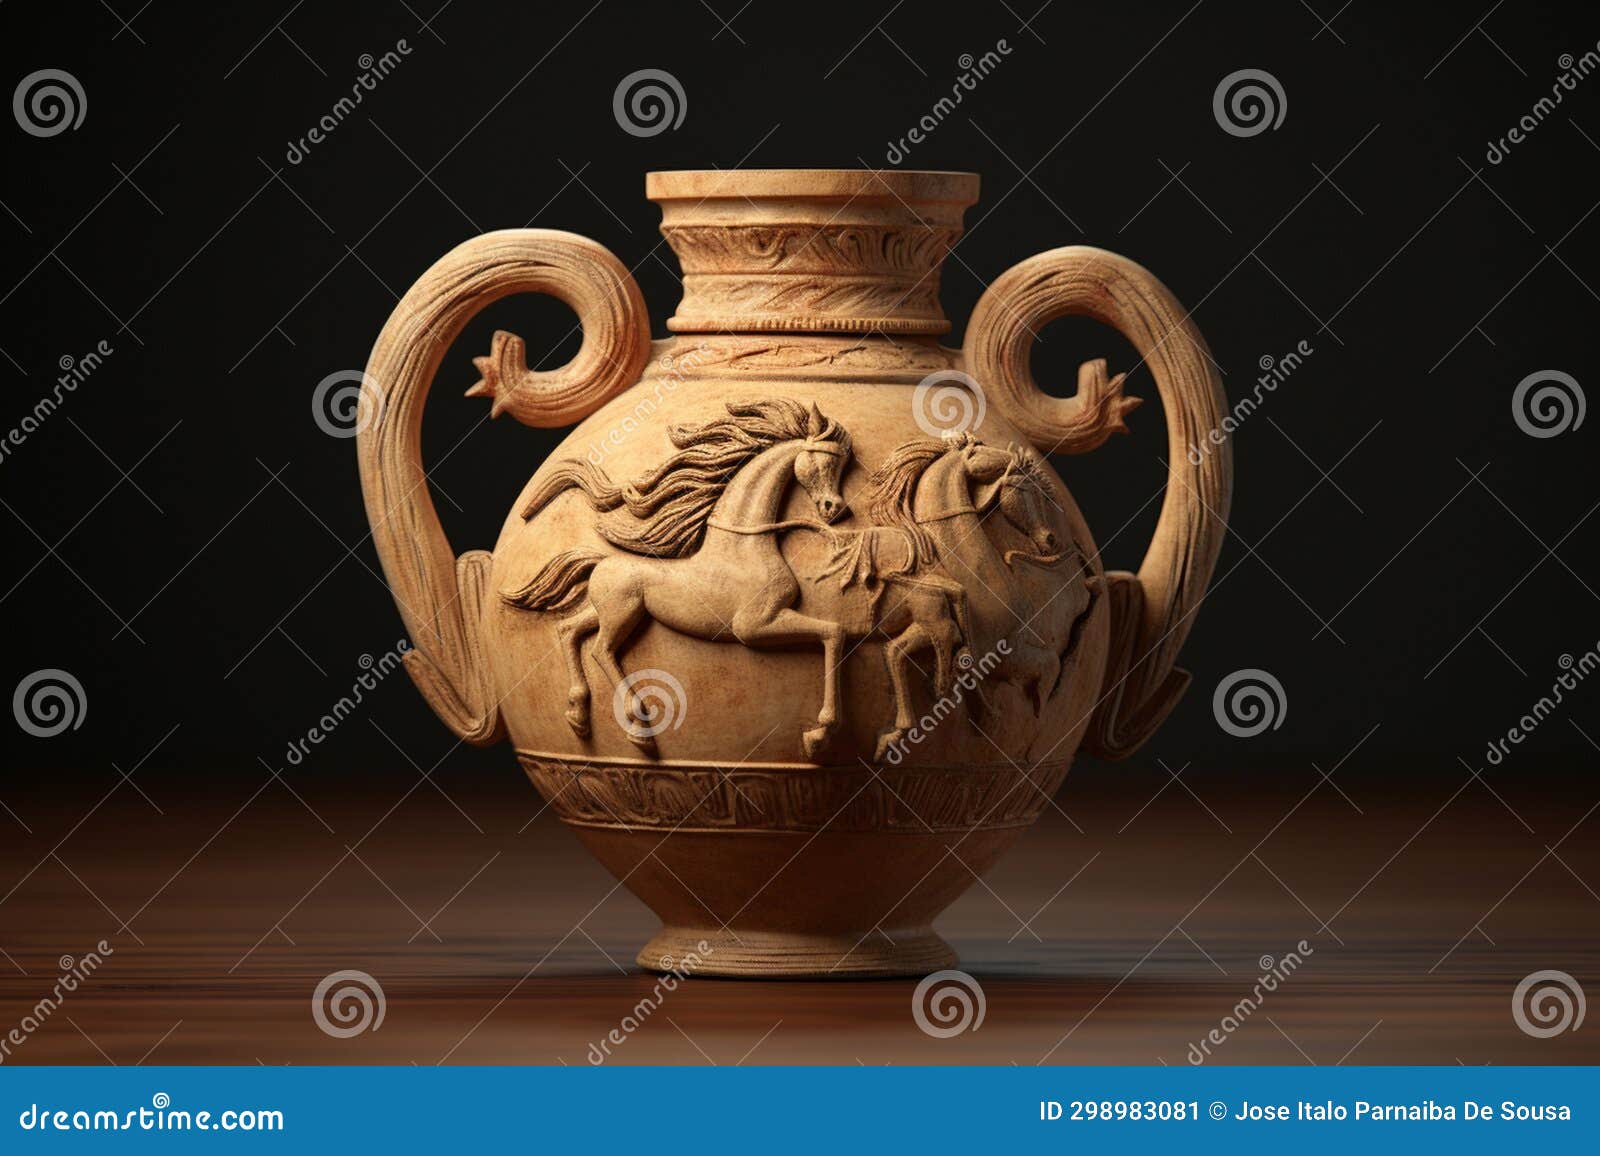 ancient greek pottery featuring mythical hippocamp